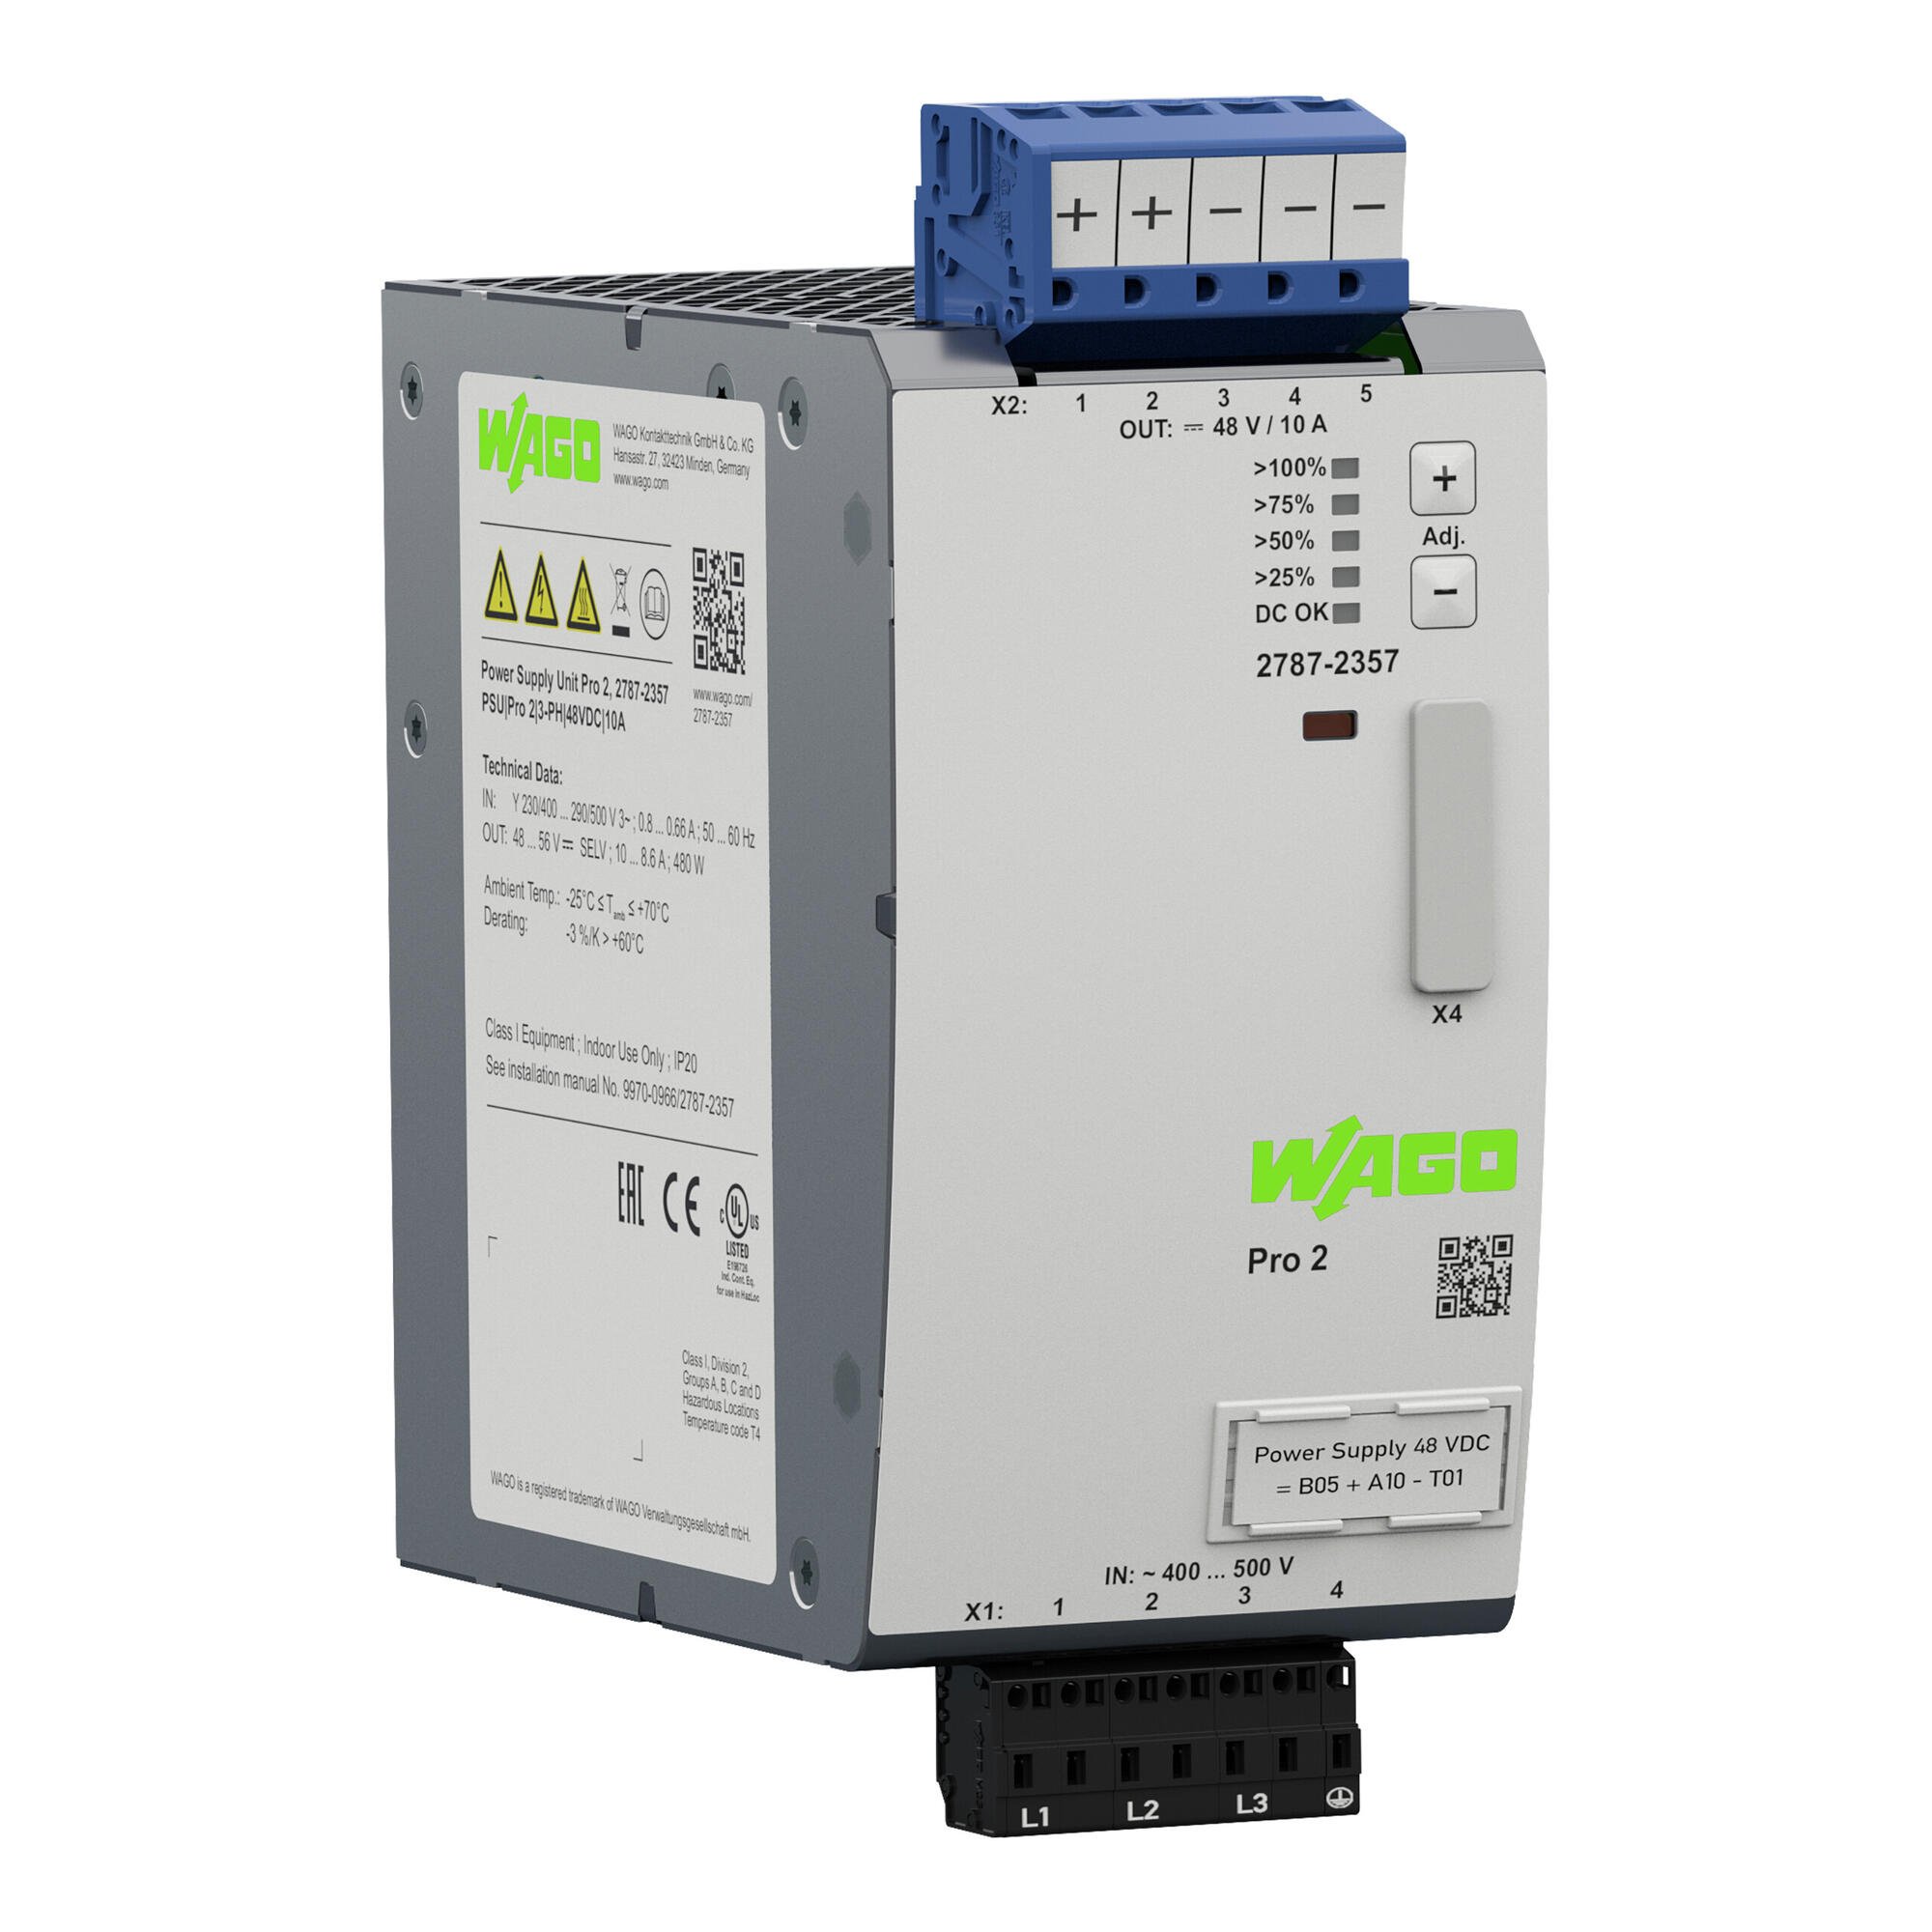 Power supply; Pro 2; 3-phase; 48 VDC output voltage; 10 A output current; TopBoost + PowerBoost; communication capability